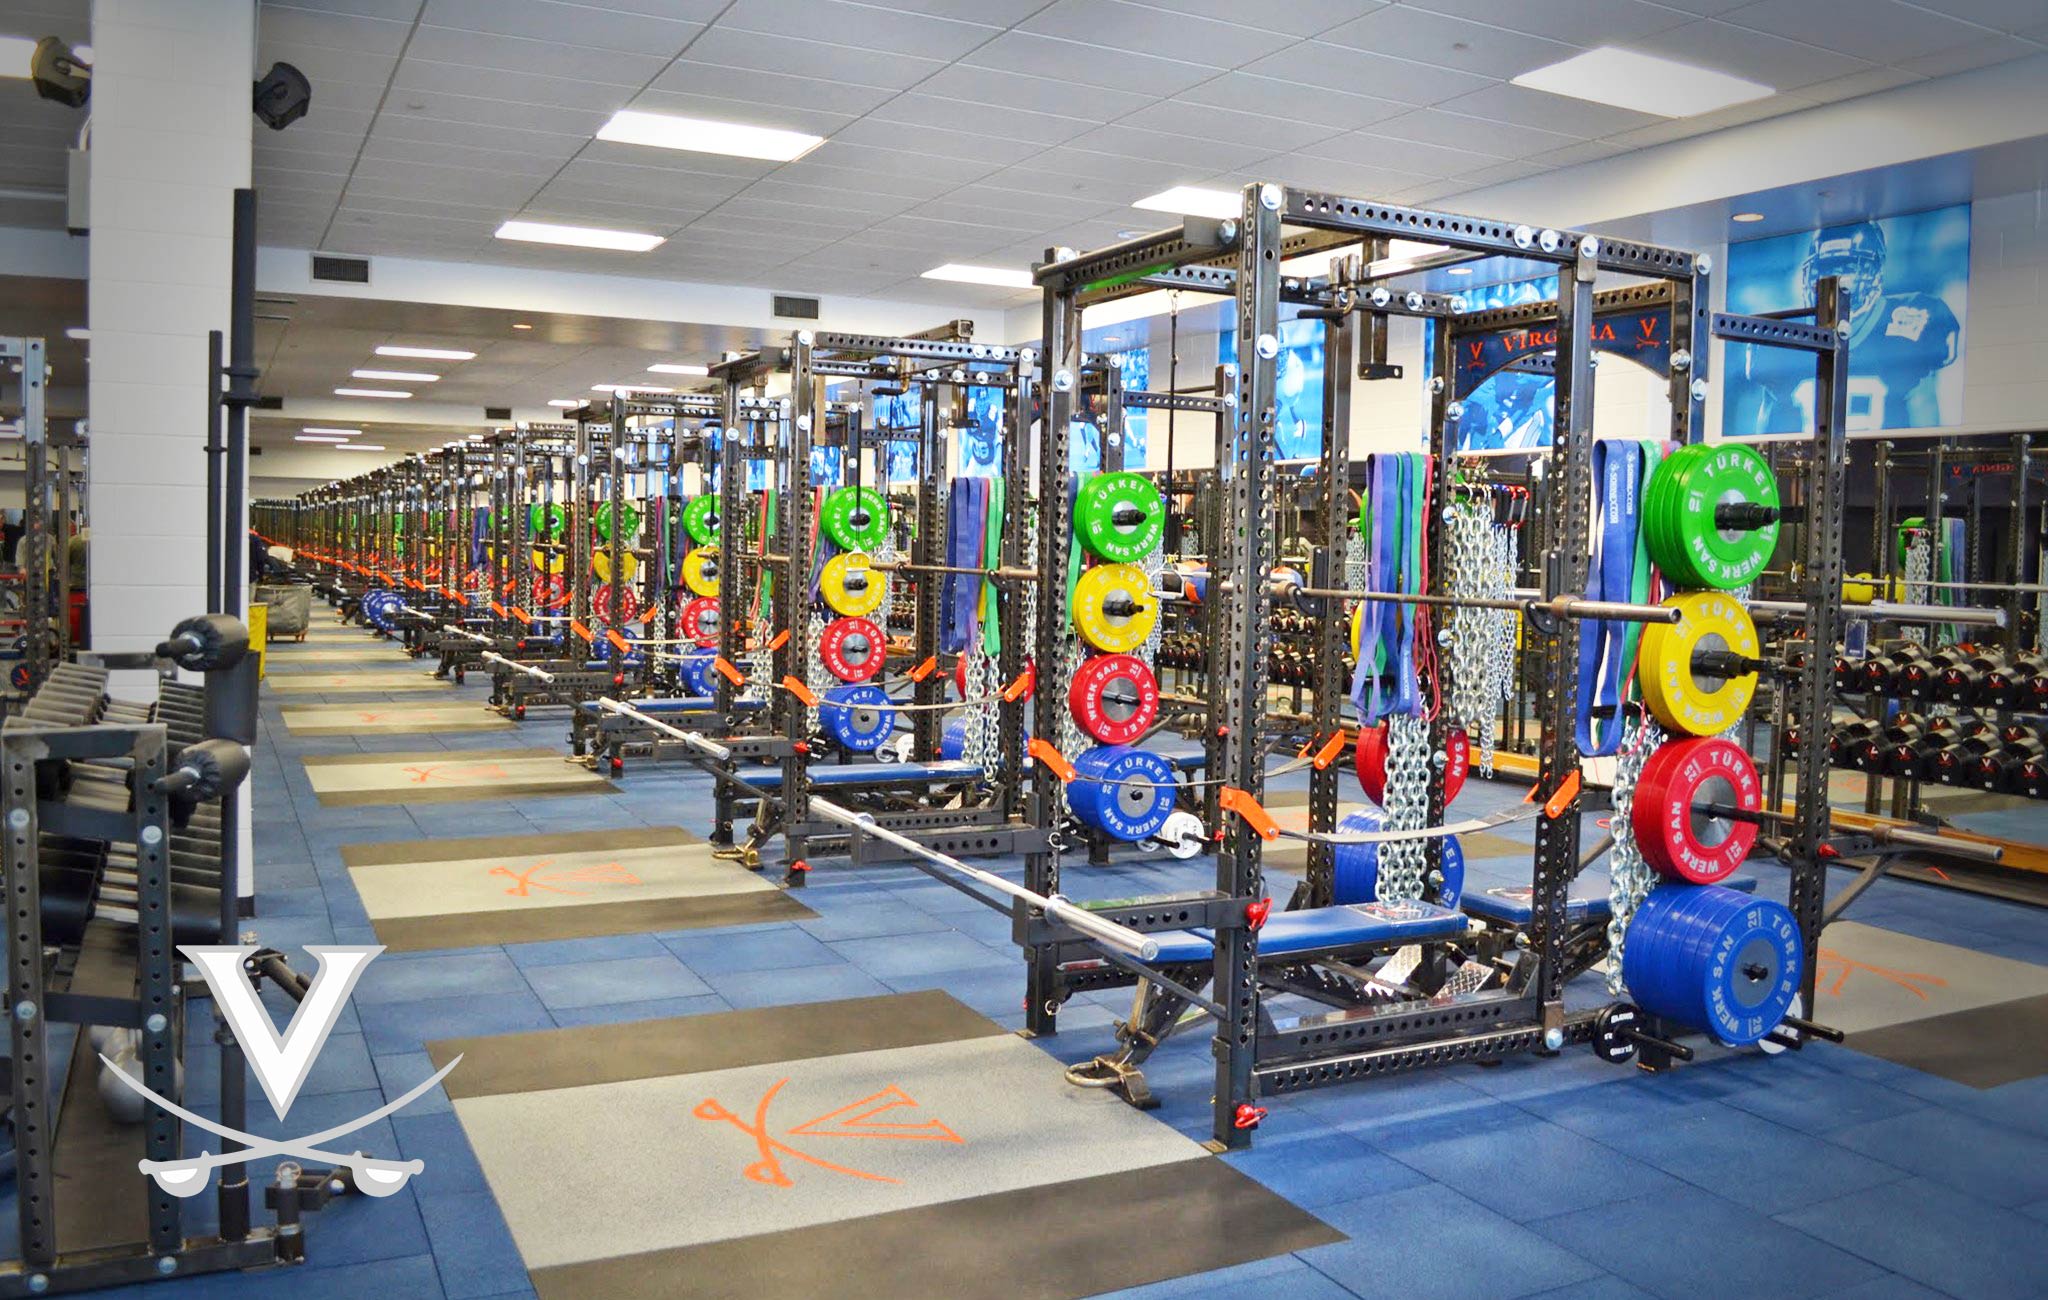 University of Virginia Sorinex strength and conditioning facility